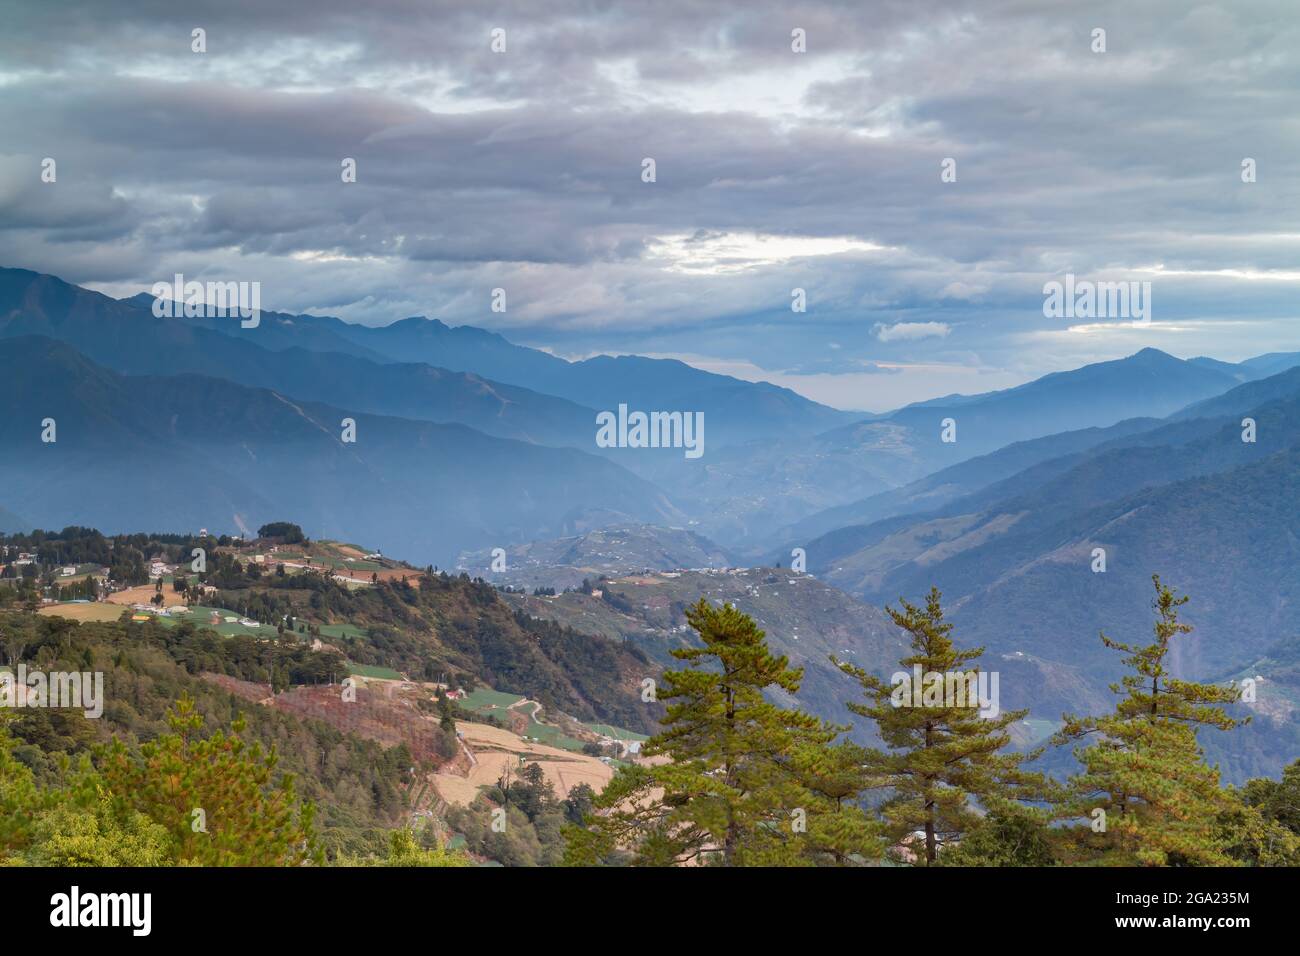 Rural landscape saw from Wuling Farm at Taichung, Taiwan Stock Photo